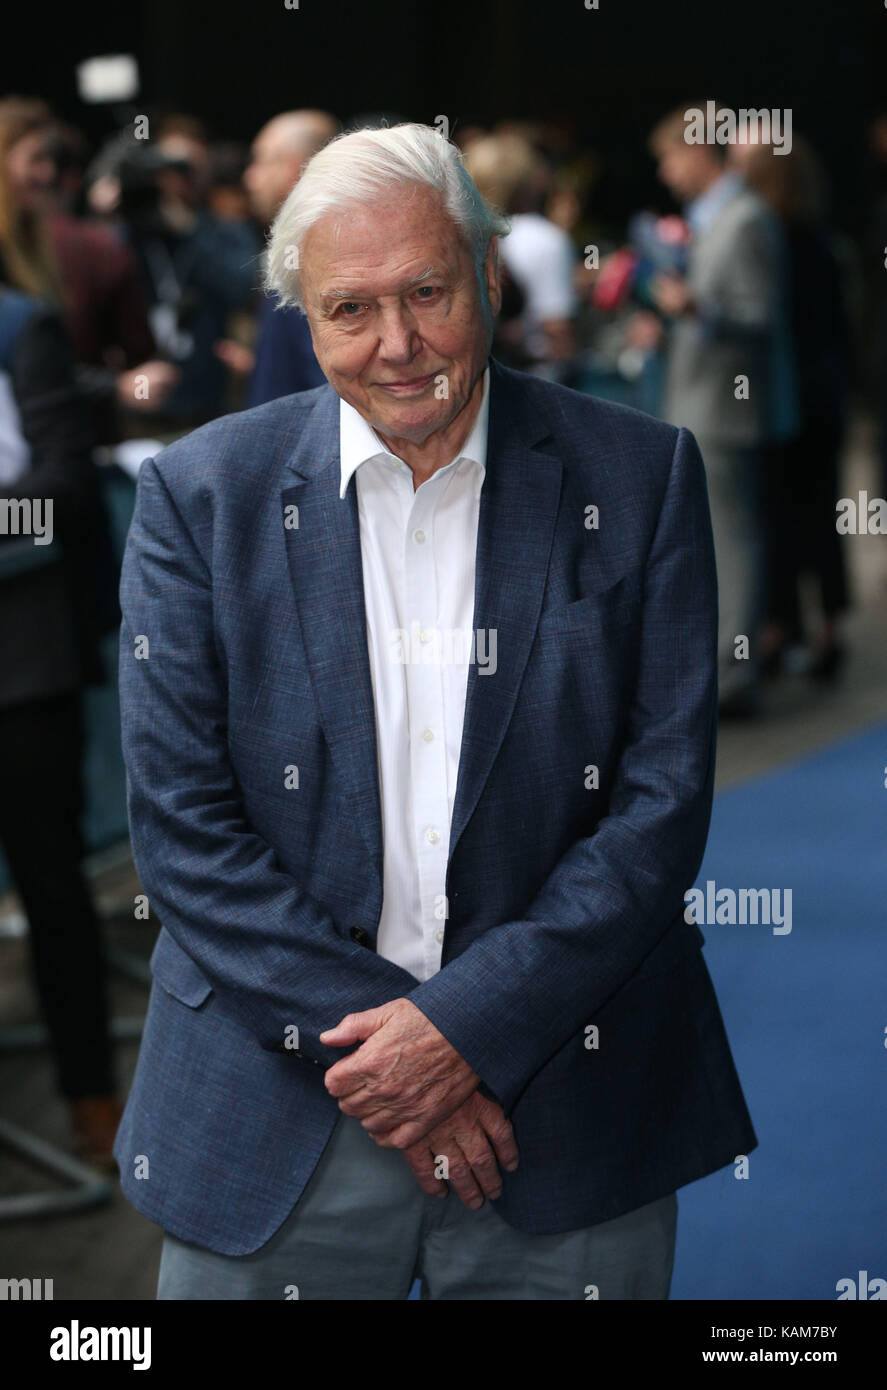 Sir David Attenborough arrives for the World Premiere screening of the BBC's Blue Planet II at the British Film Institute IMAX cinema, in London. Stock Photo